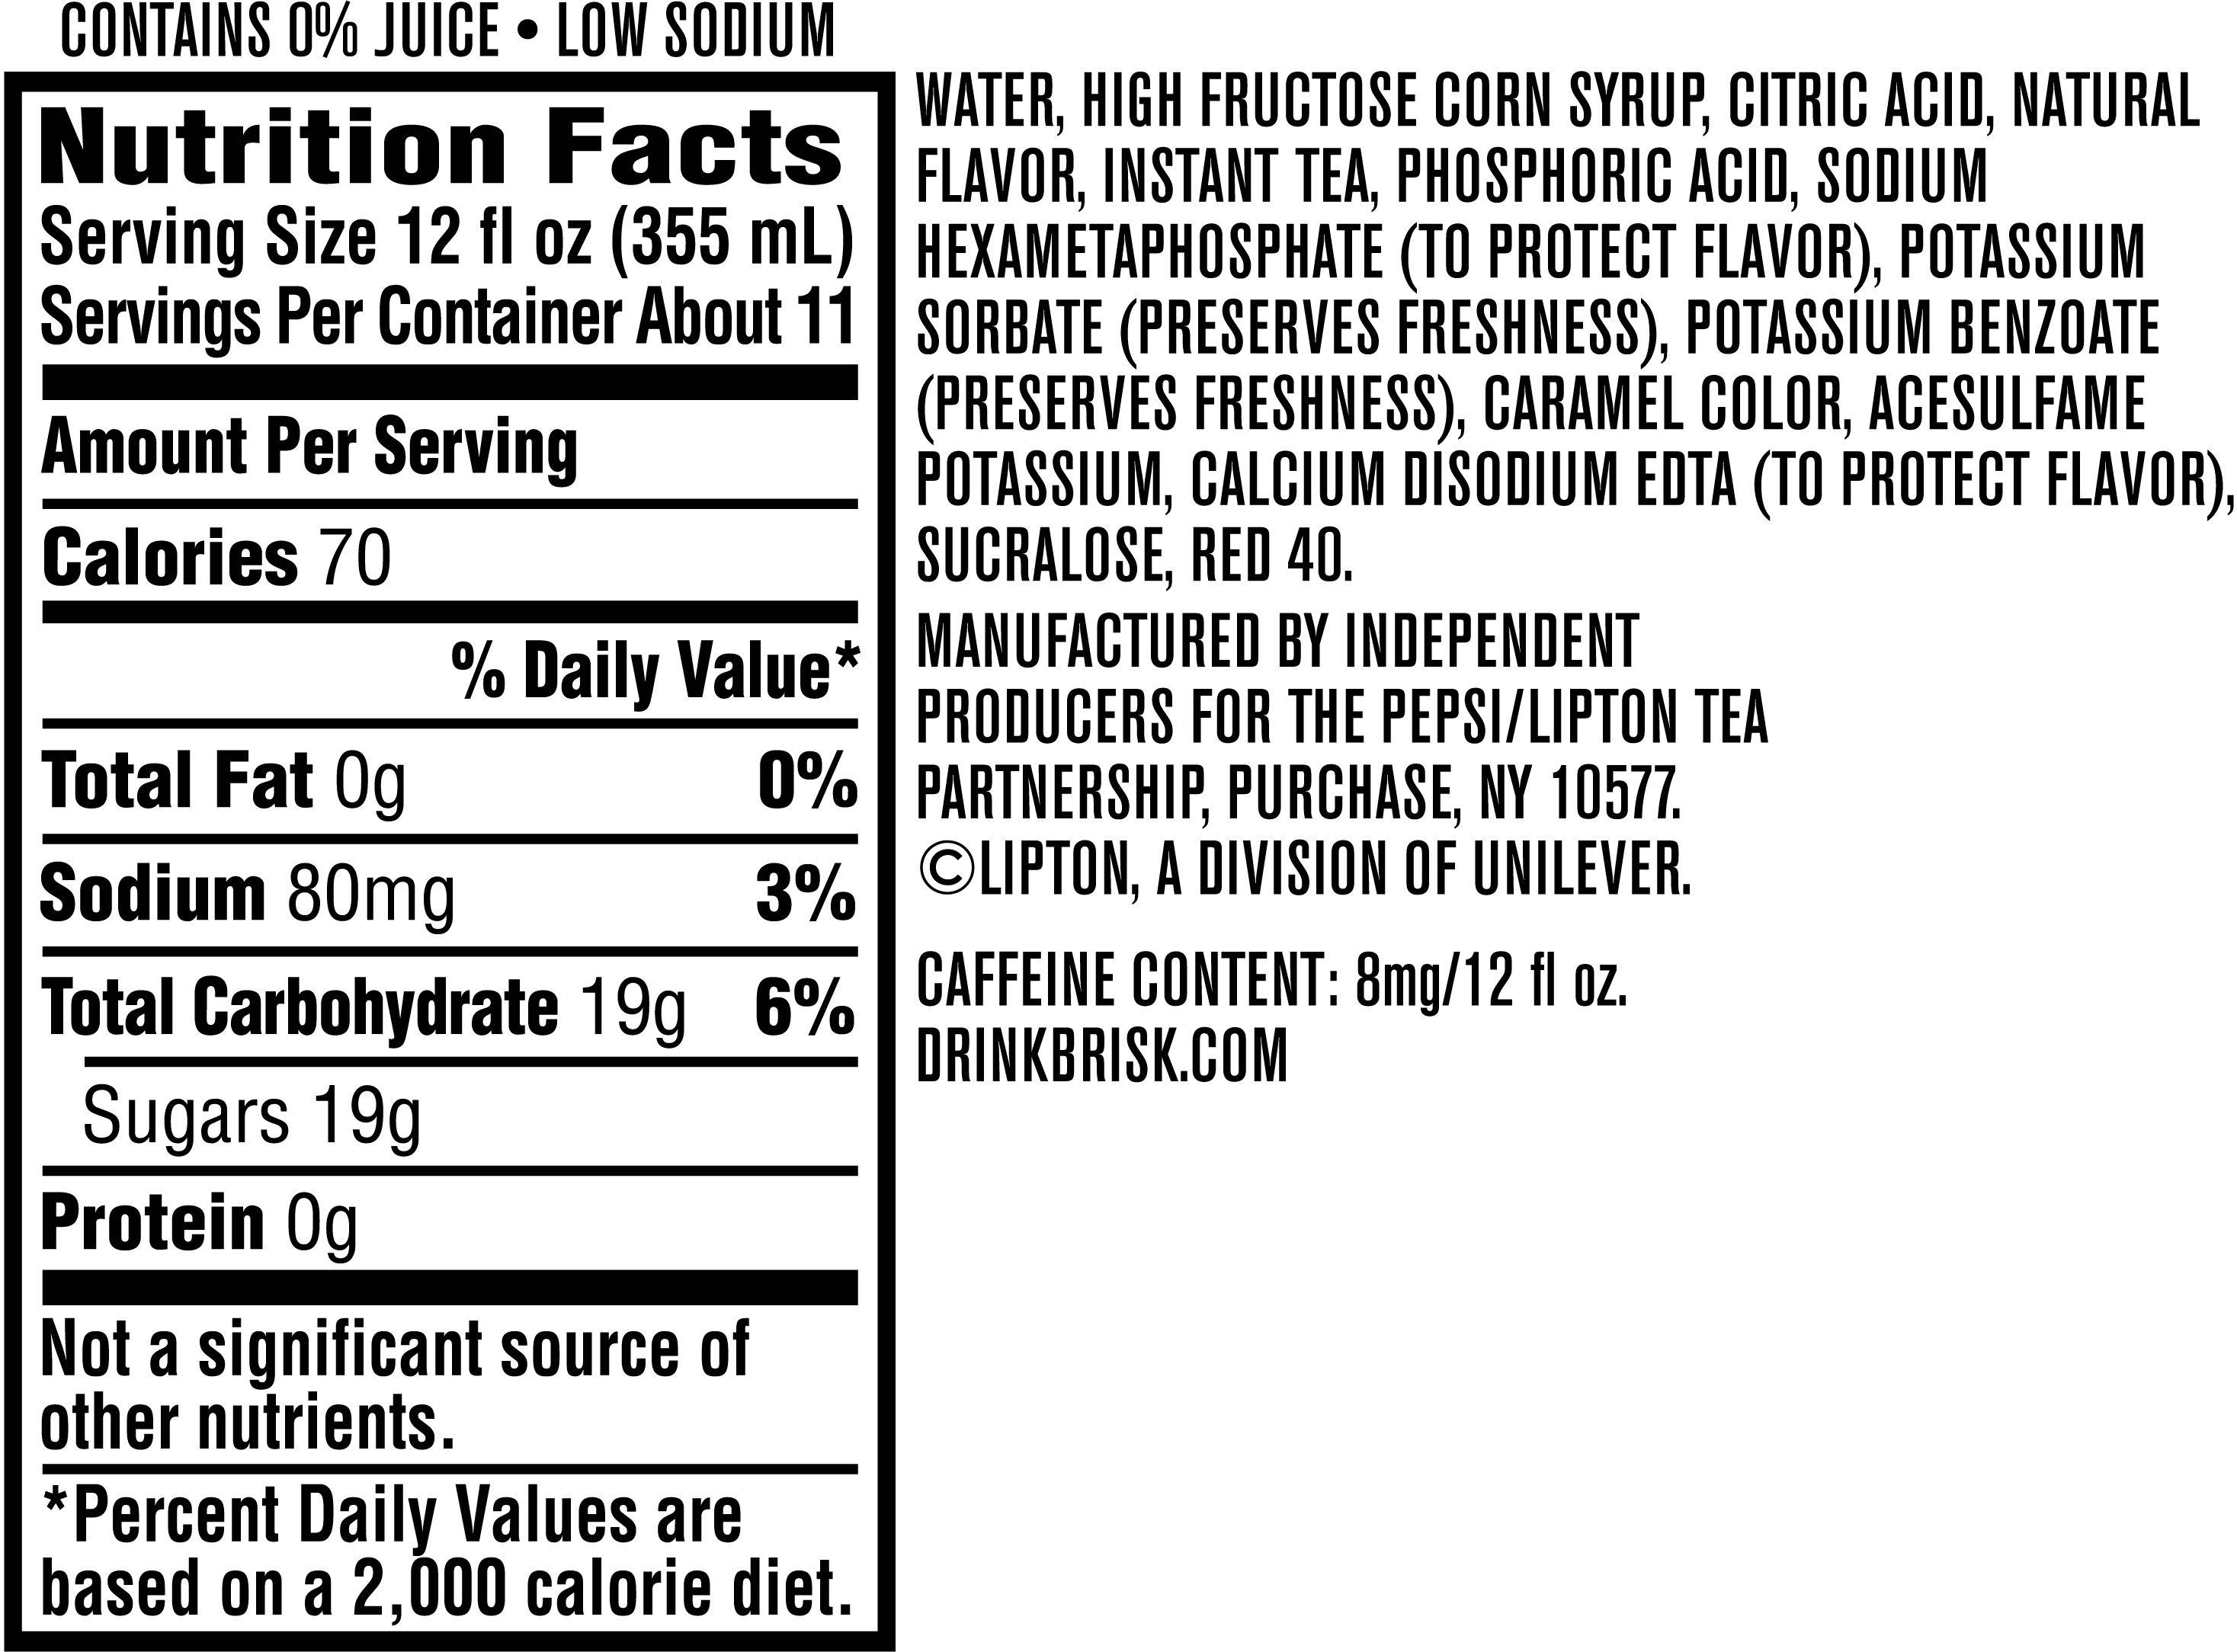 Image describing nutrition information for product Brisk Iced Tea Raspberry